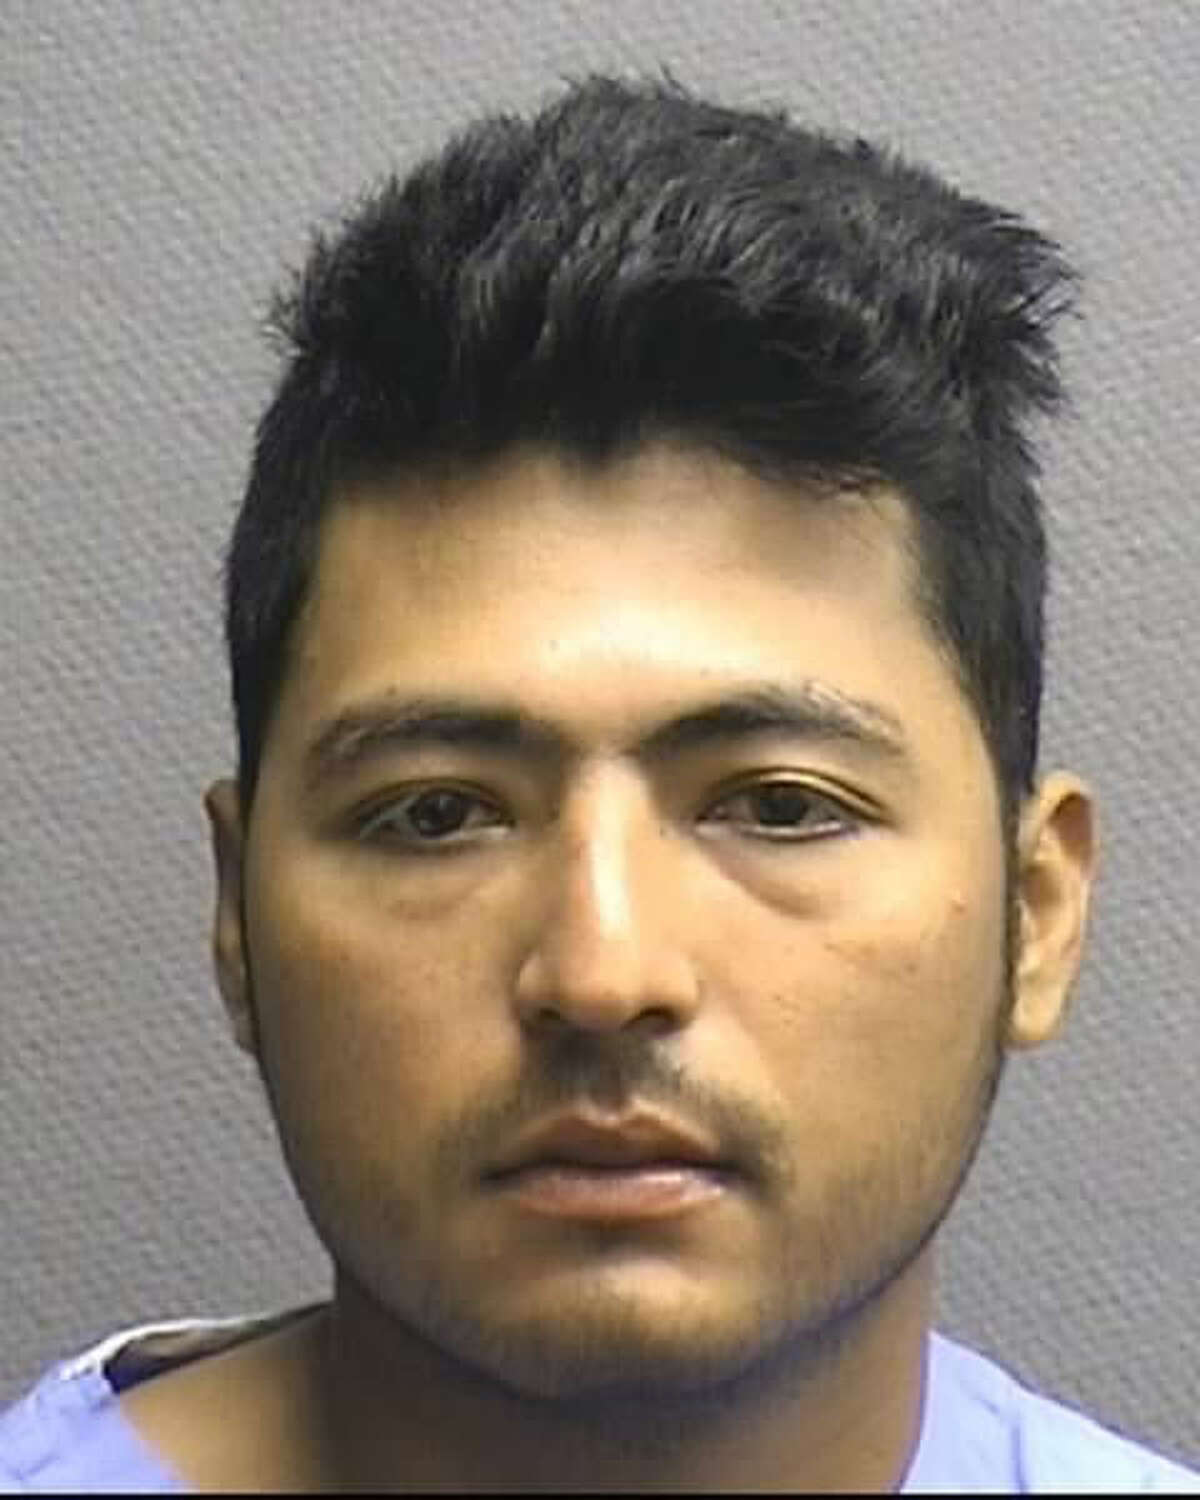 Florian Quintanilla-Riva, 26, was released from HPD custody after being detained because of the fatal wreck, prosecutors said. His blood alcohol level was .47, about six times the legal limit of .08, according to court documents.